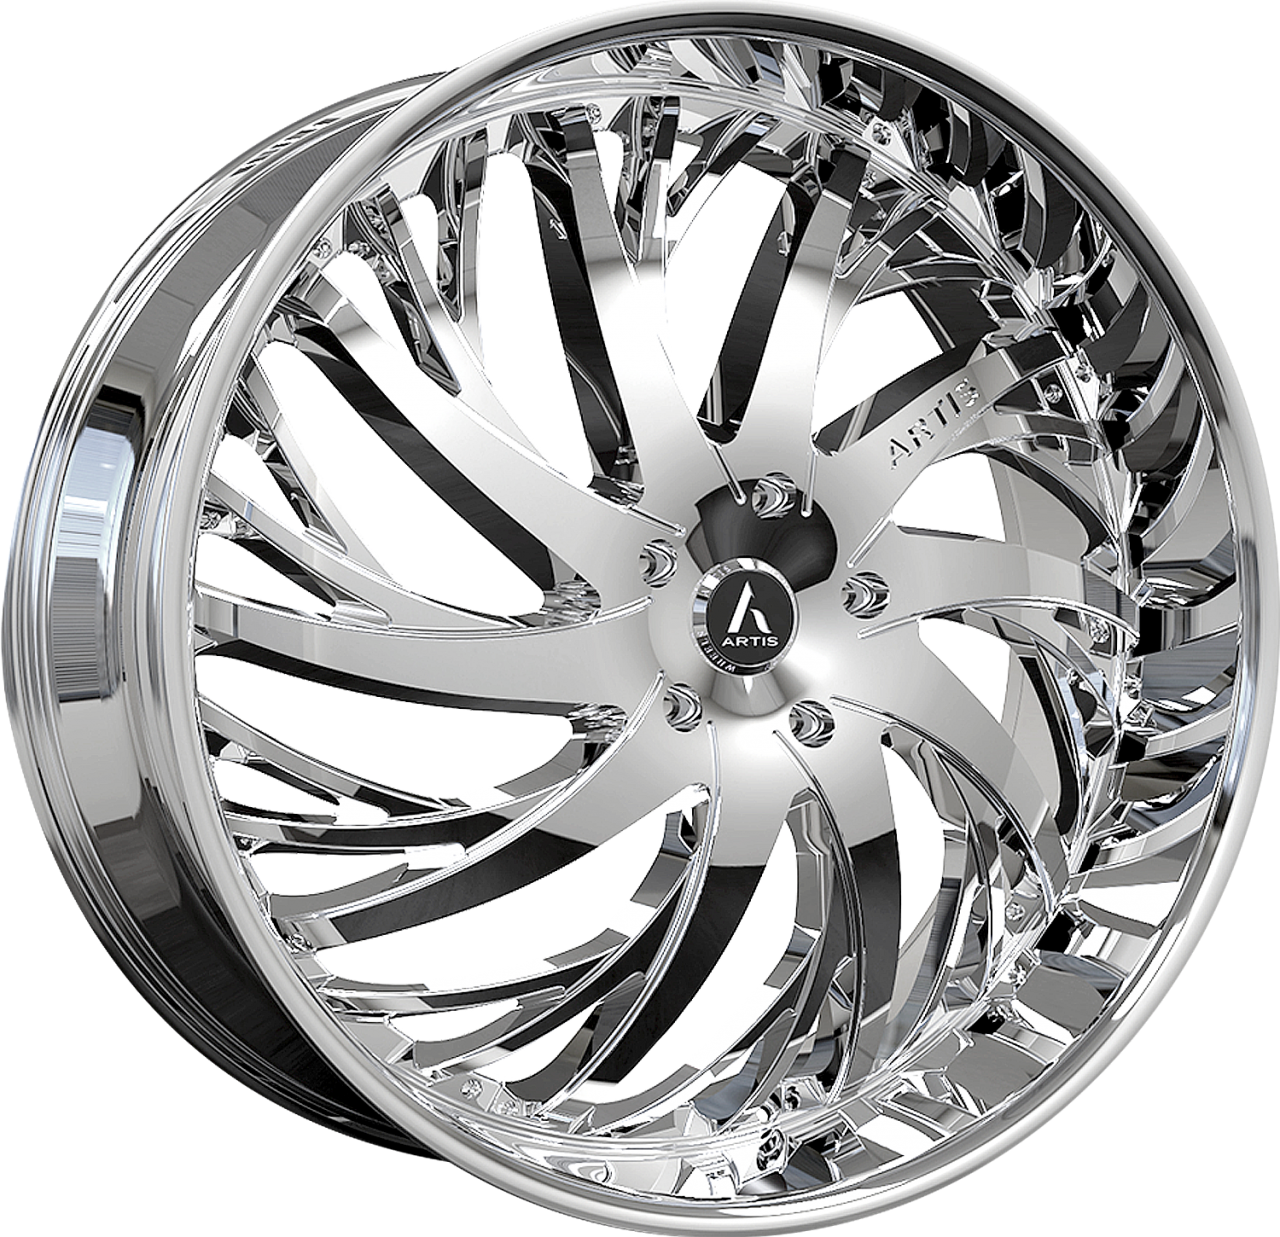 Artis Forged Decatur wheel with Chrome finish